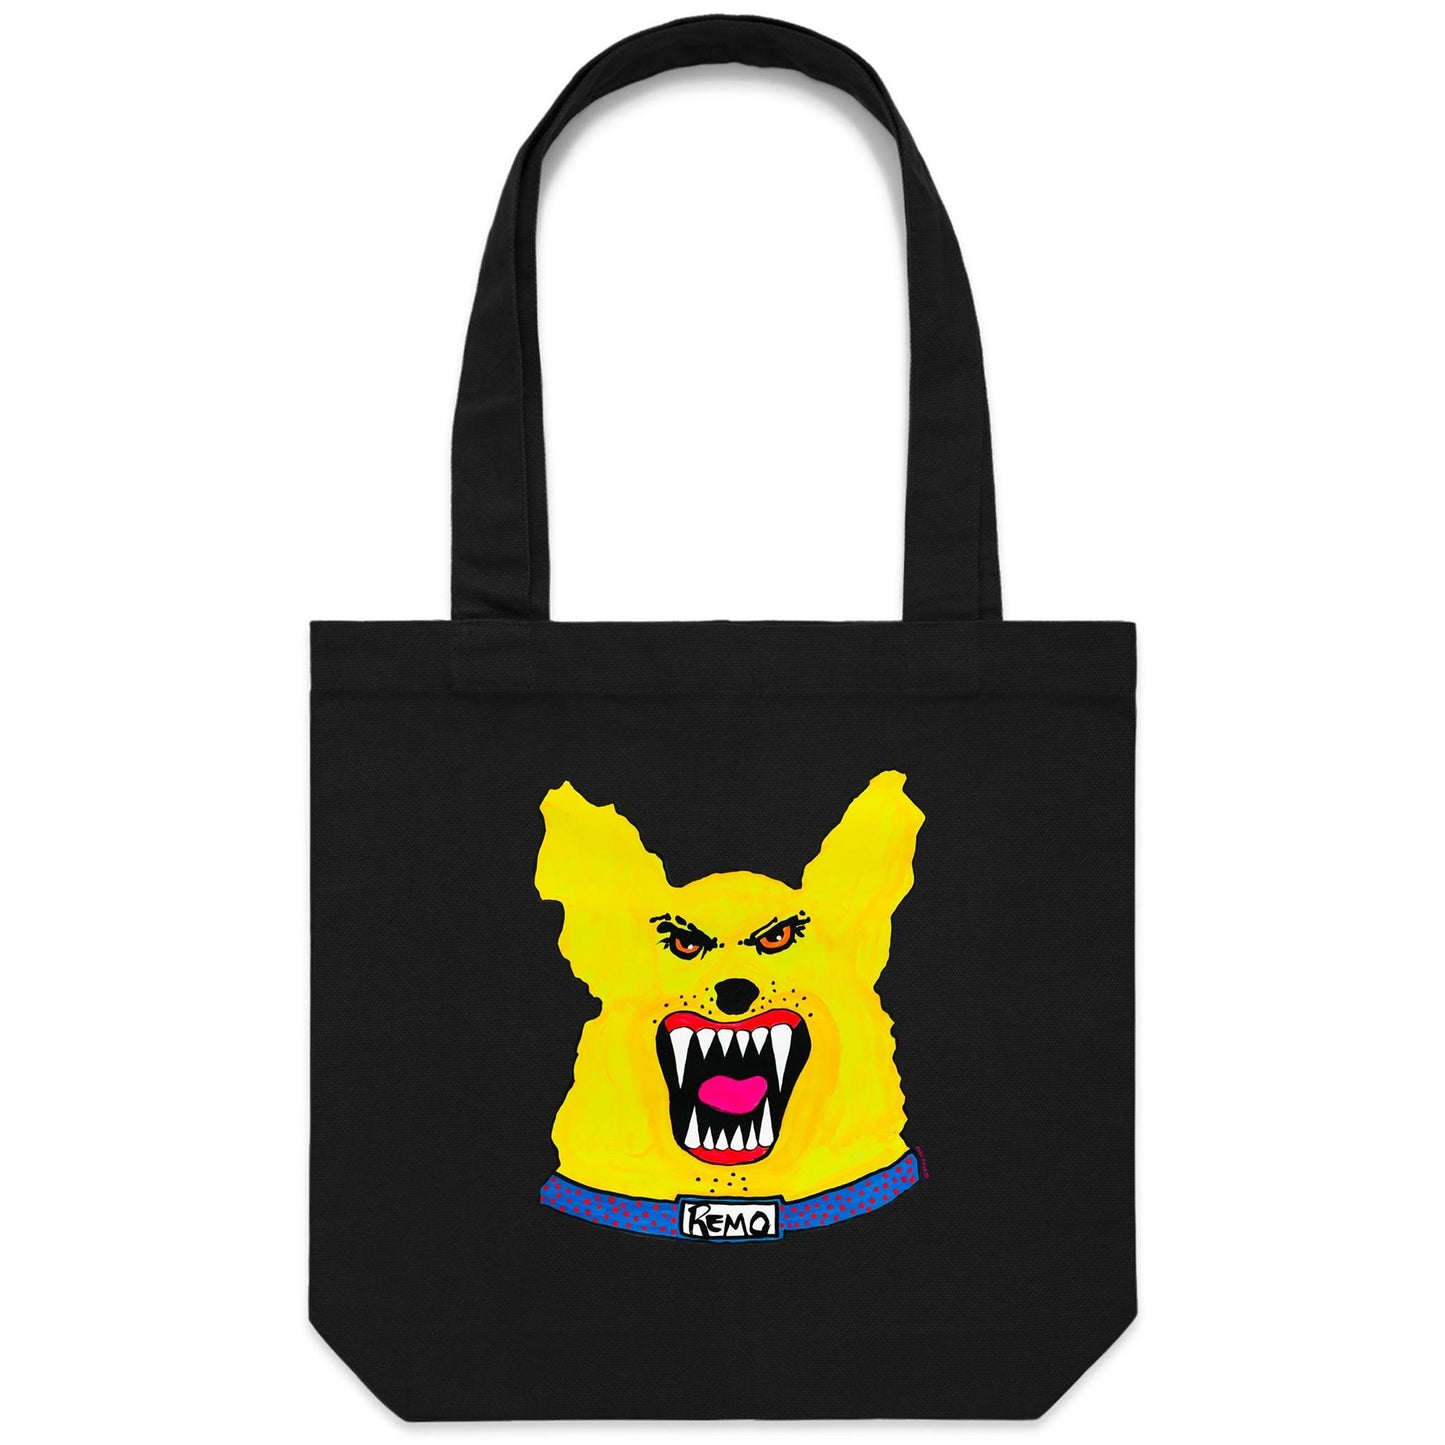 Mad Dog Canvas Totes